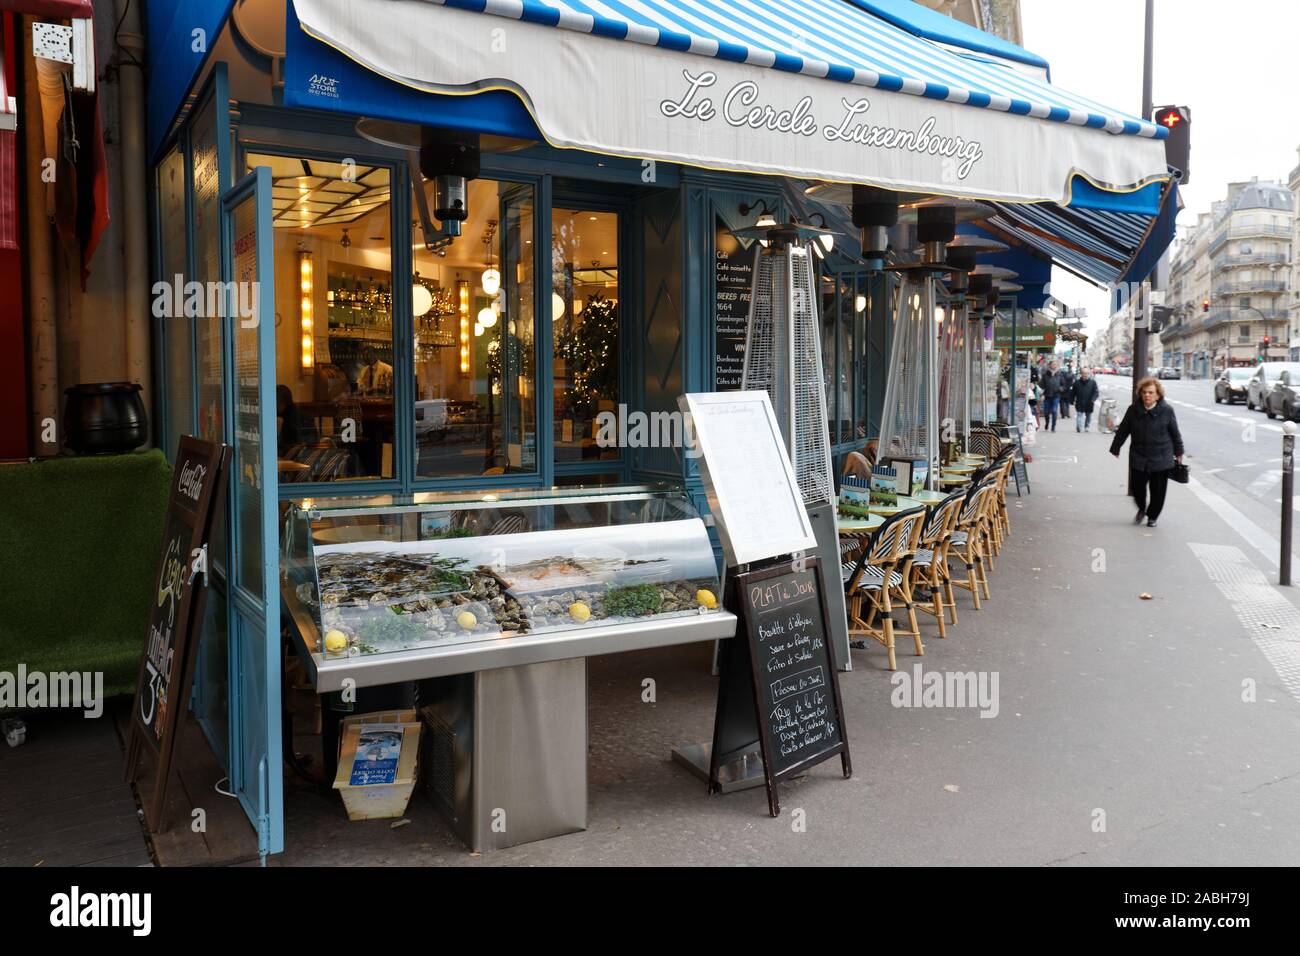 The traditional French restaurant Le Ceecle Luxembourg located in Latin qurter , Paris, France. Stock Photo